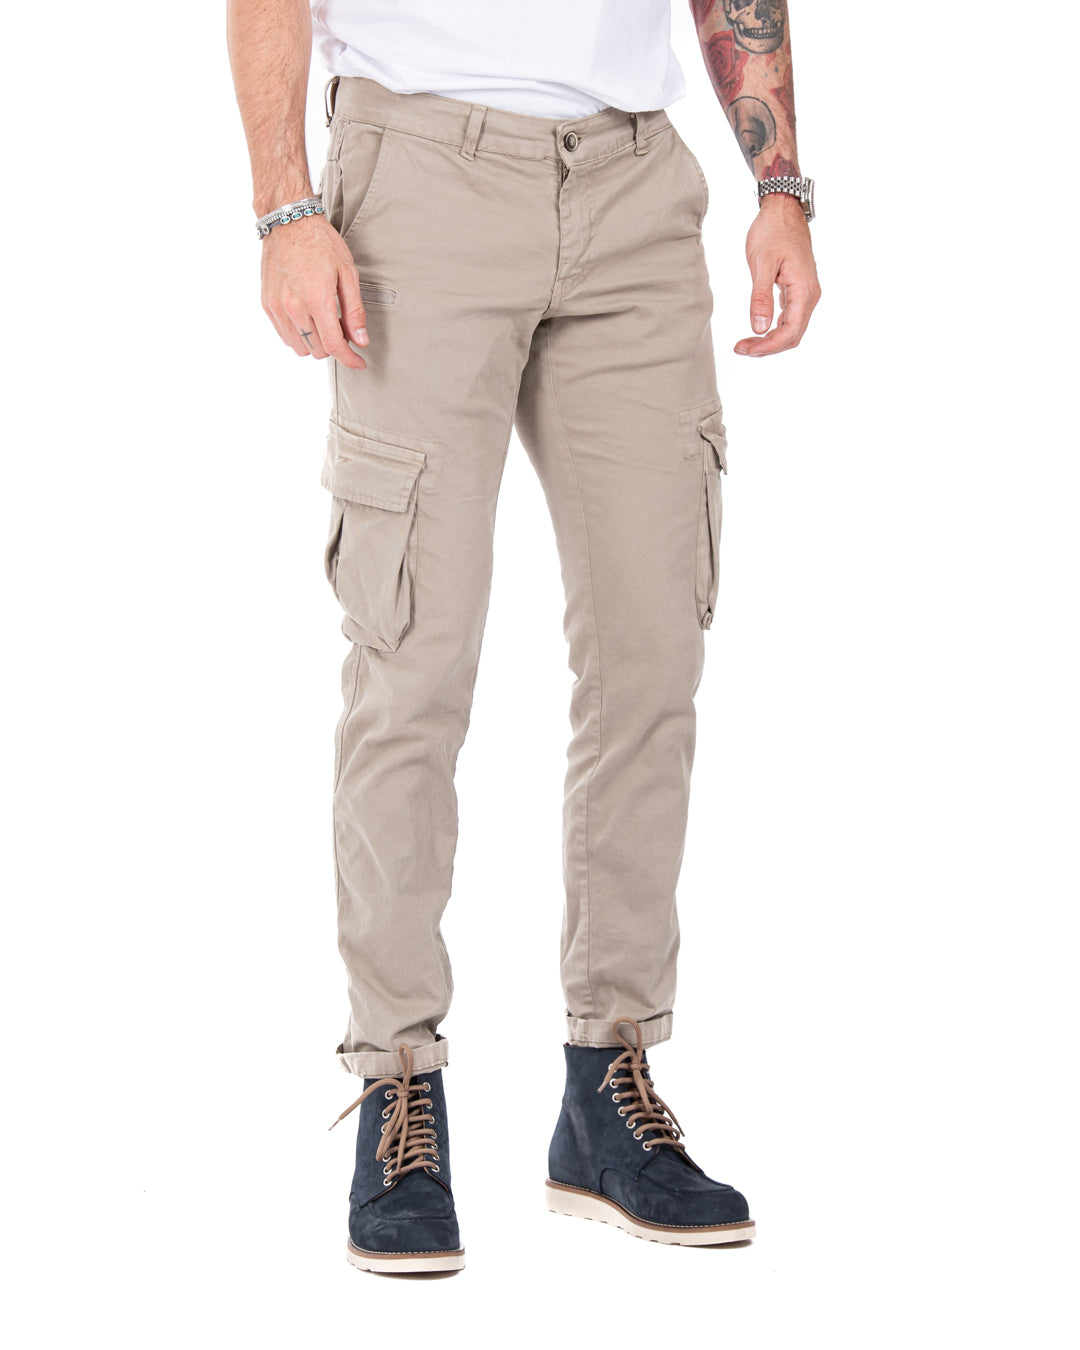 Roy - twine cargo trousers